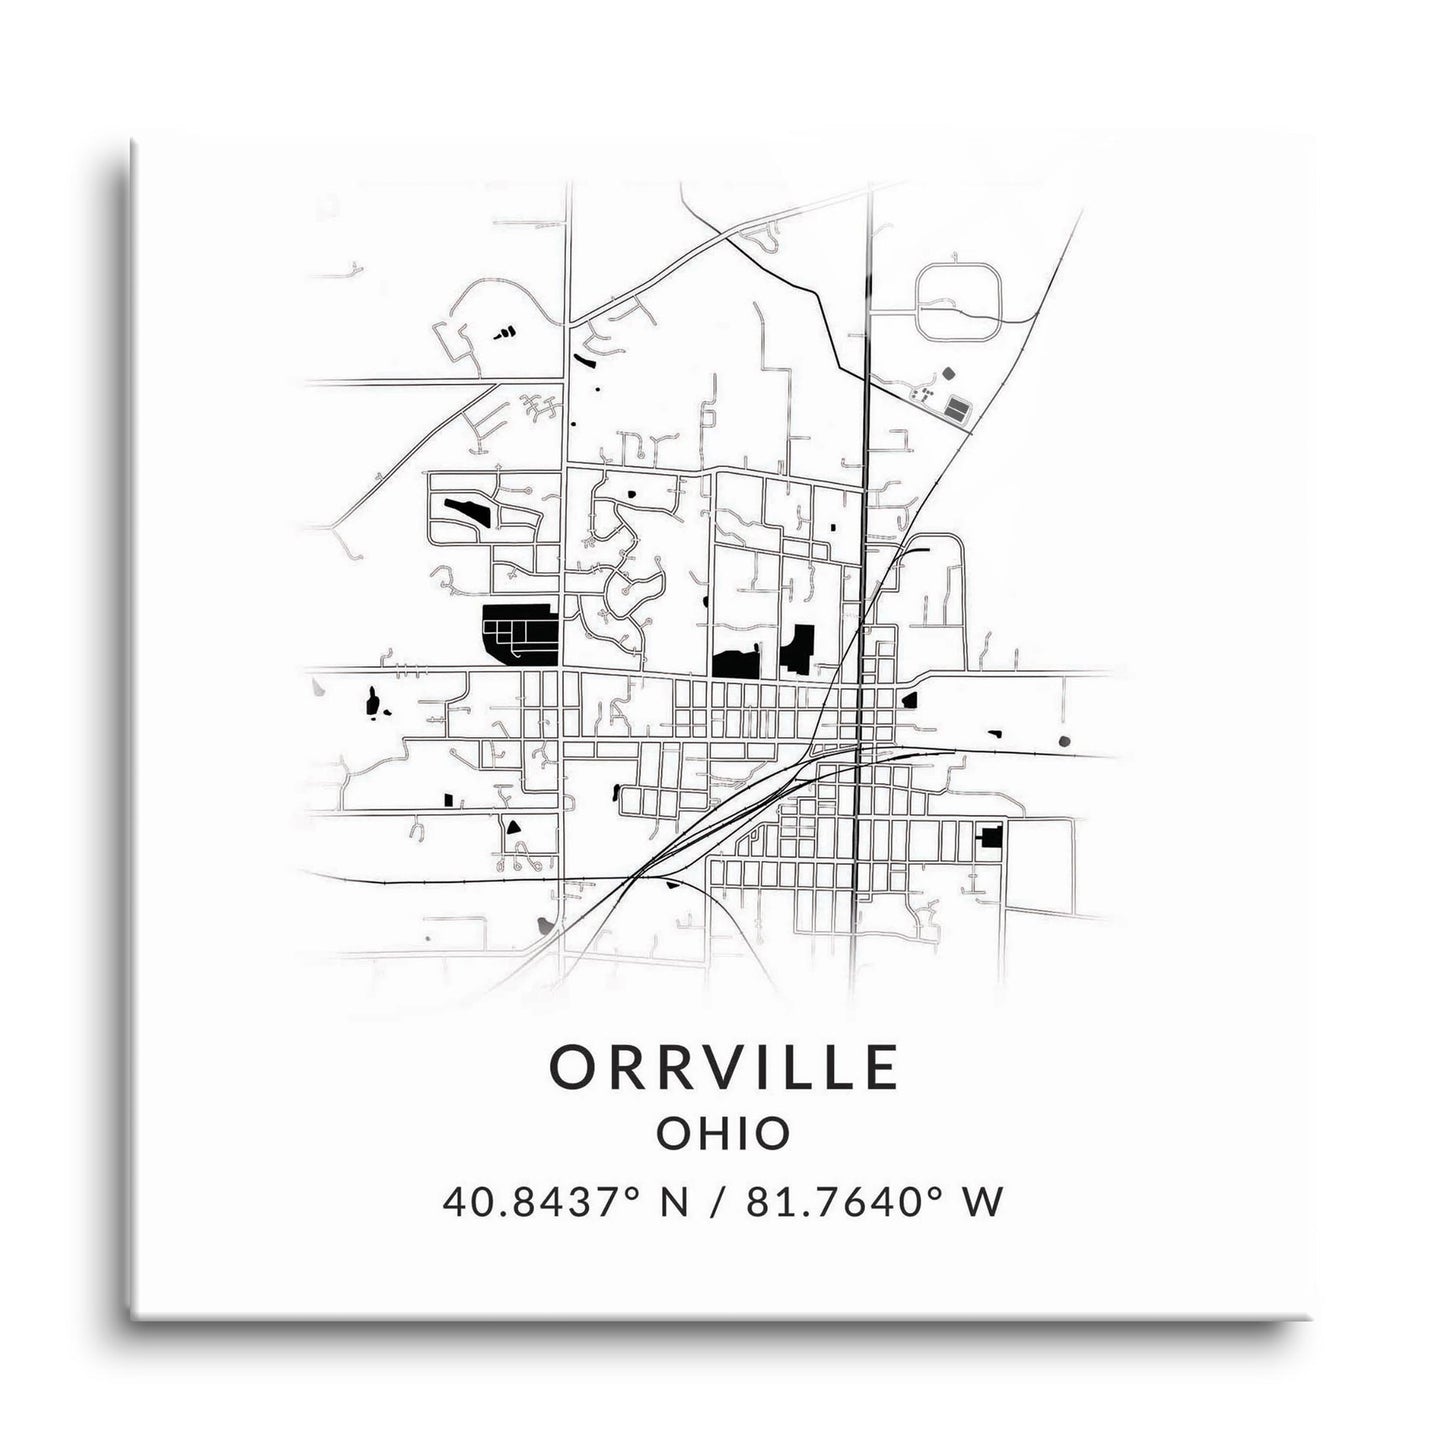 Orrville Oh Minimalistic Map With Coordinates | Hi-Def Glass Art | Eaches | Min 1